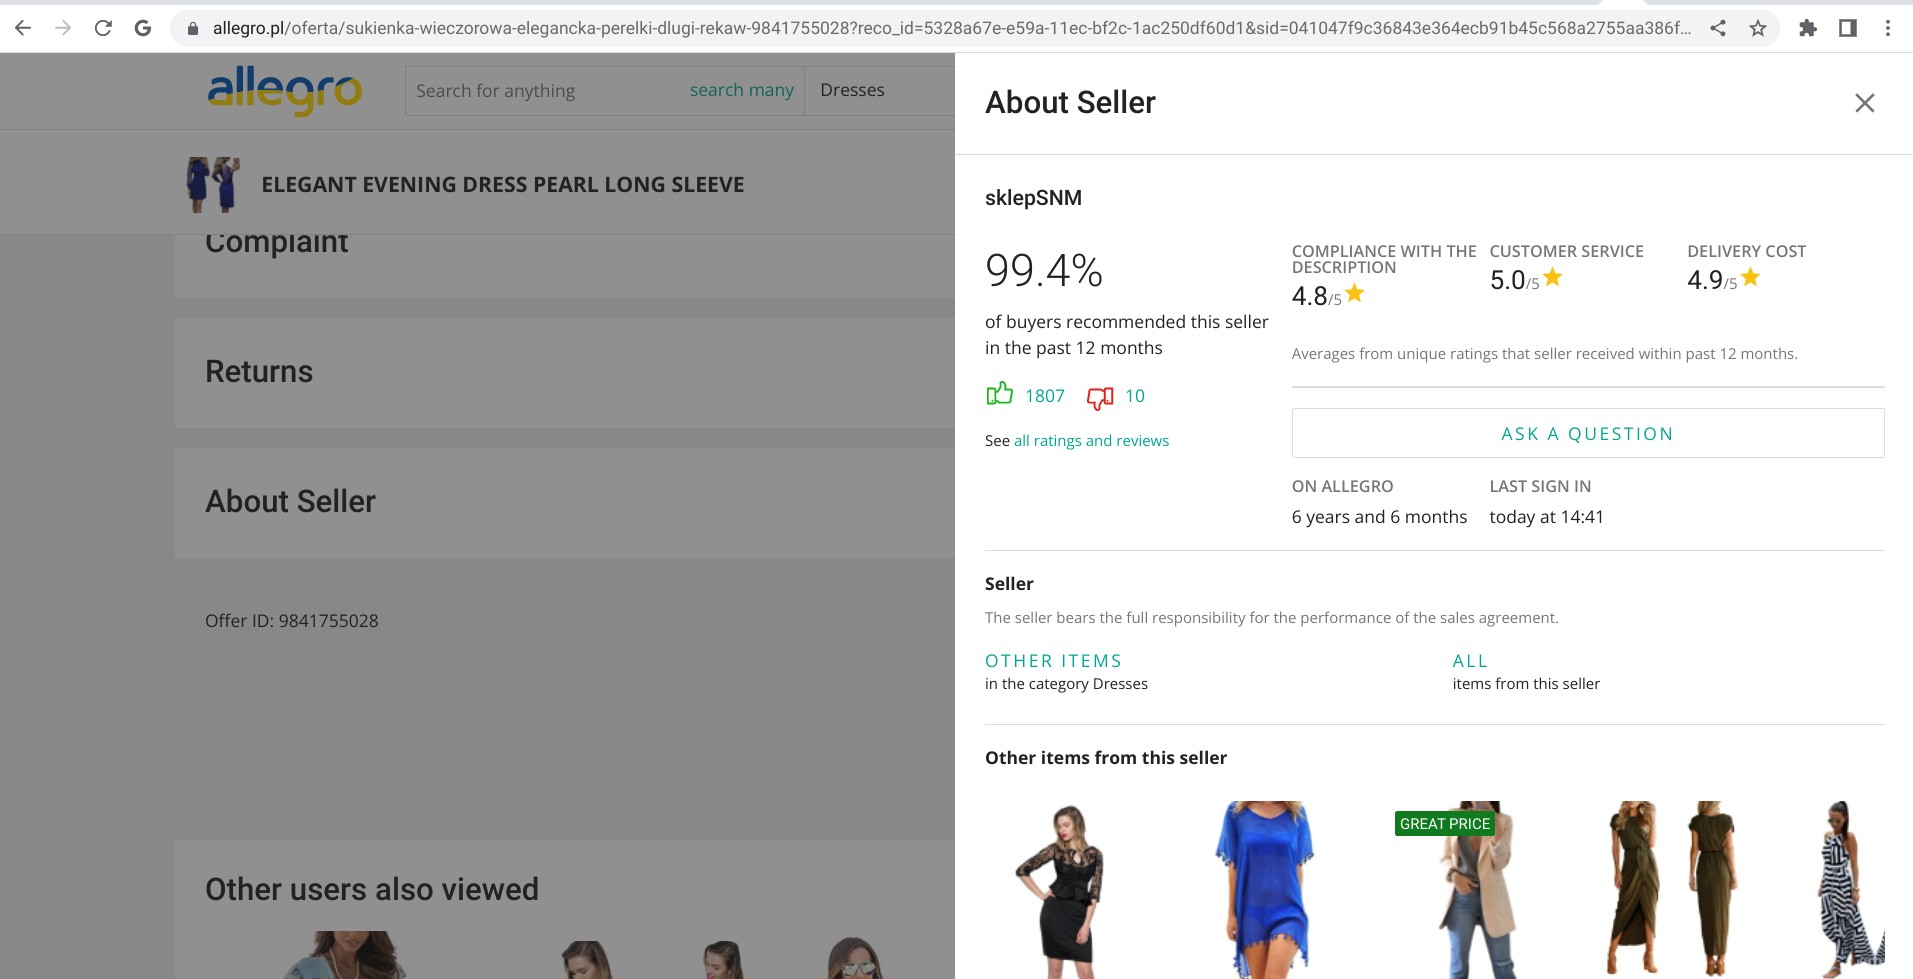 Screenshot of a random product listing on allegro.pl displaying all seller information at the bottom of the listing